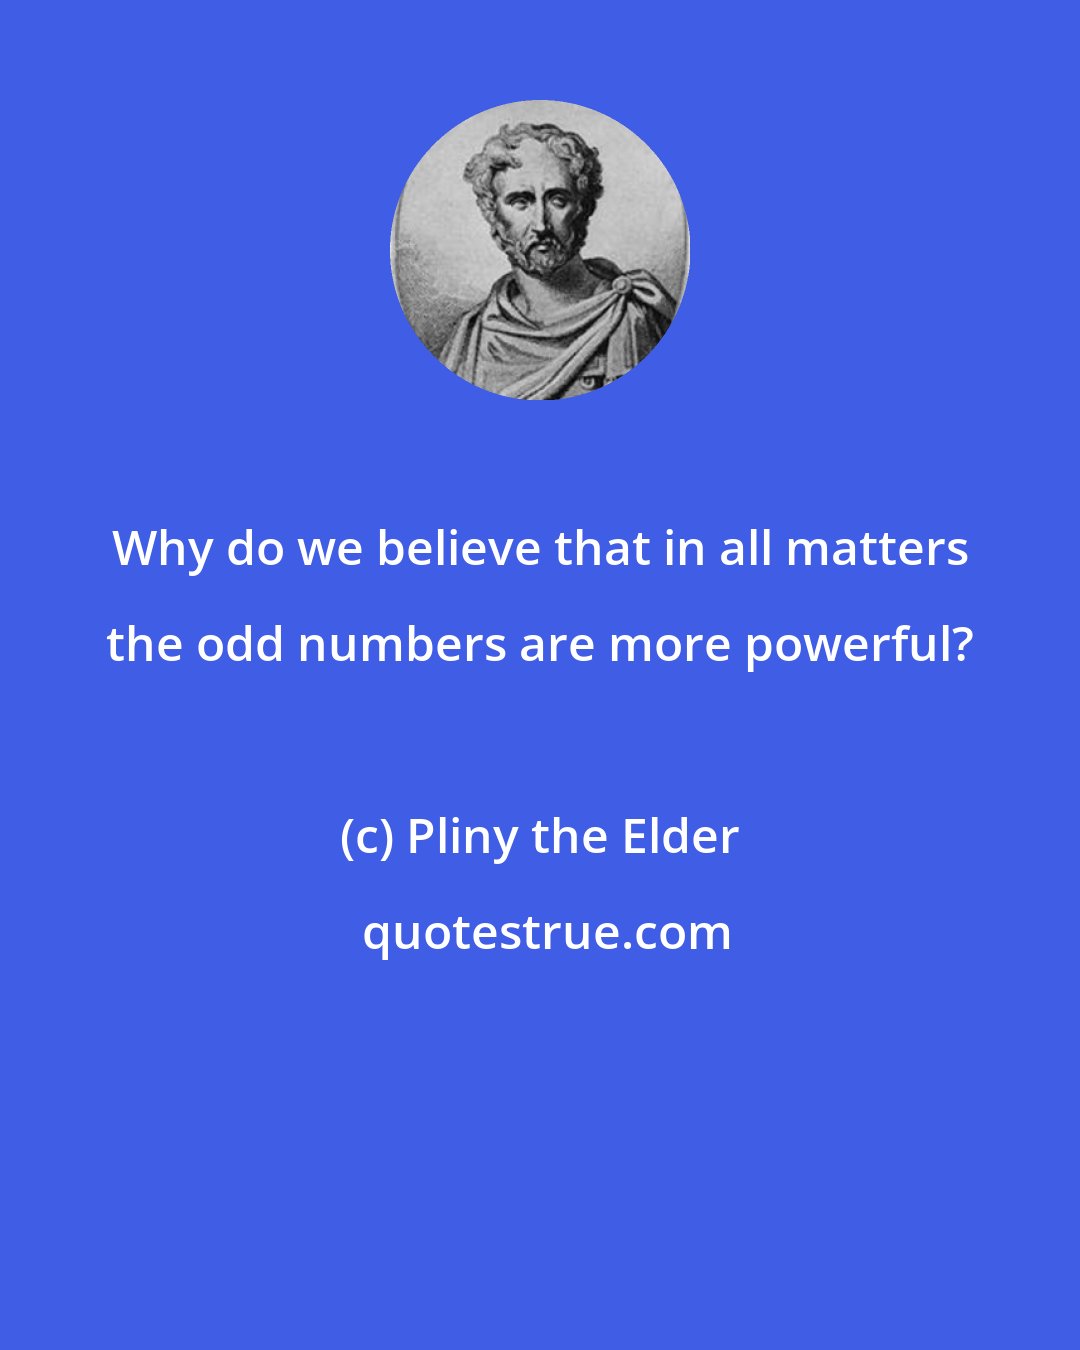 Pliny the Elder: Why do we believe that in all matters the odd numbers are more powerful?